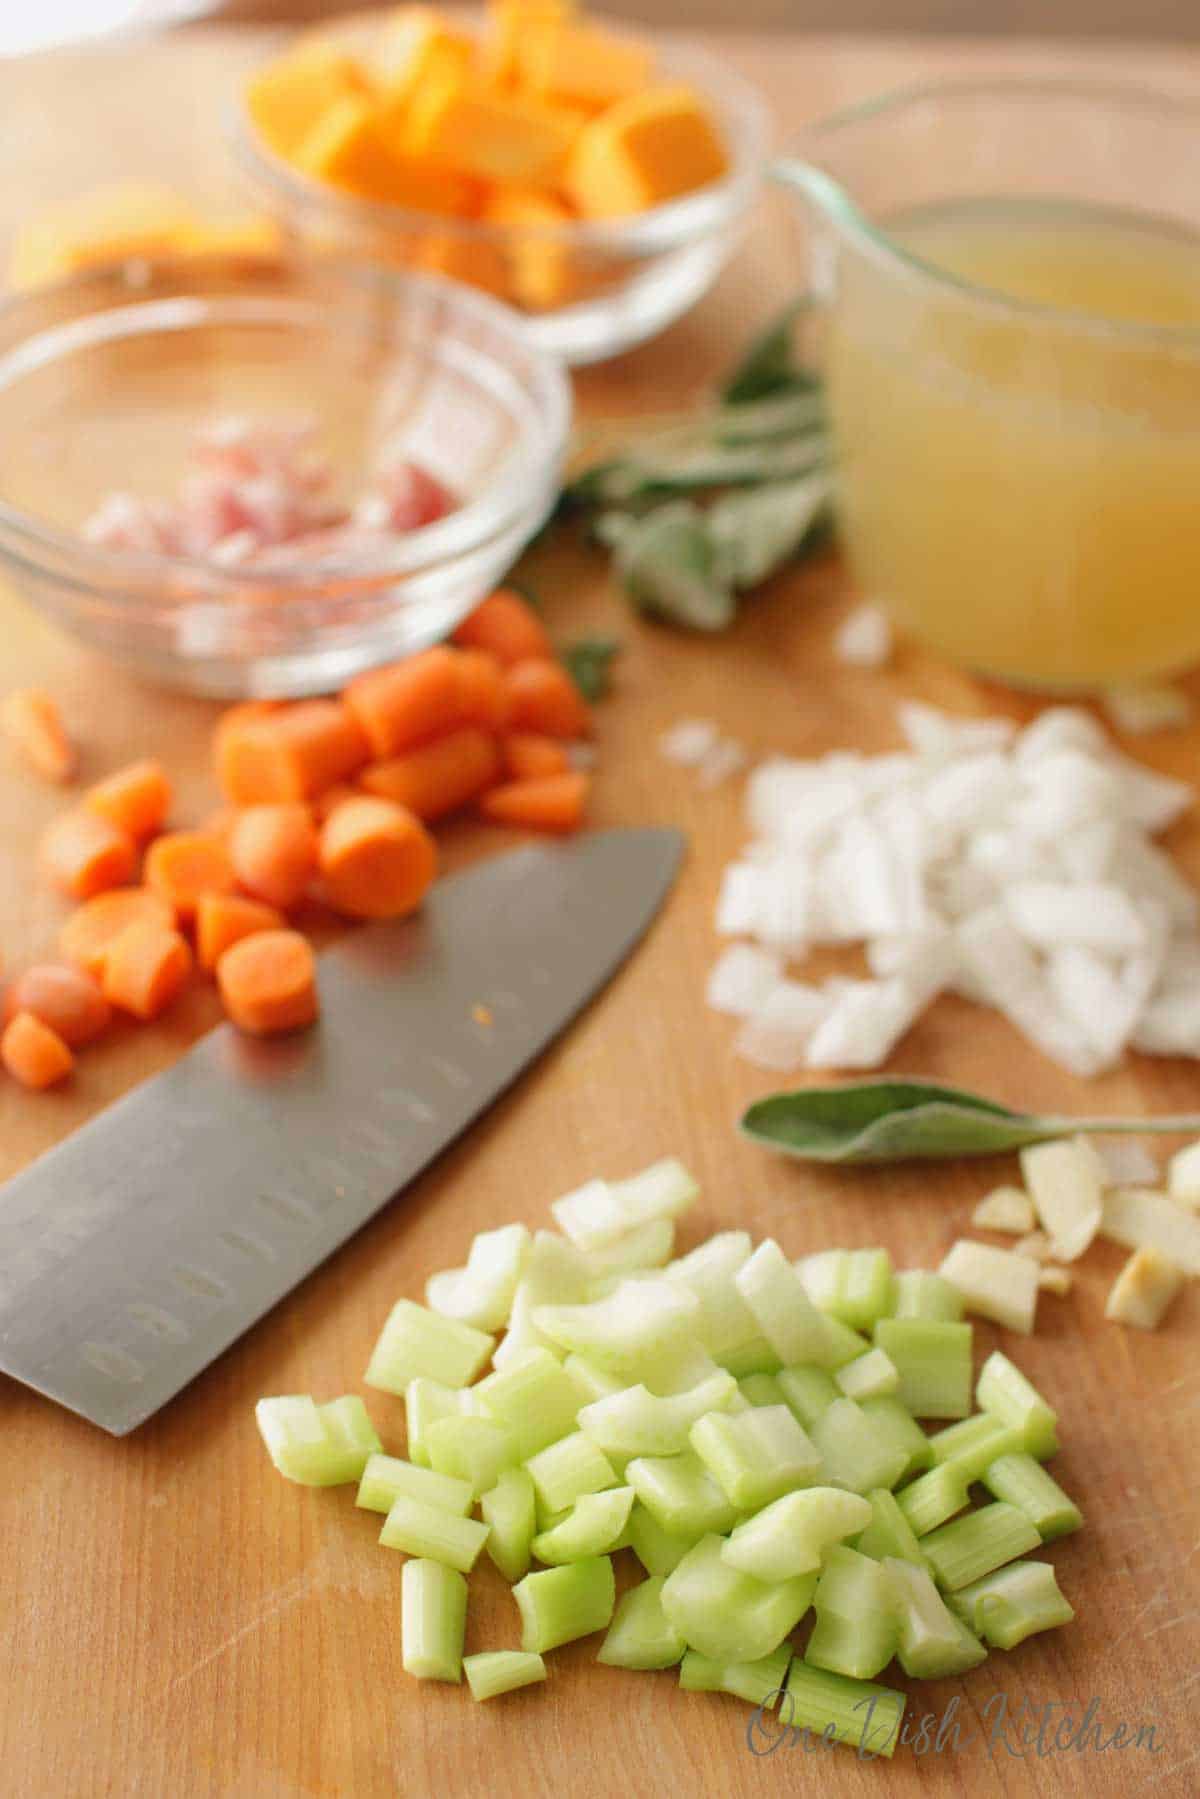 Ingredients needed in and Instant Pot Butternut Squash Soup- chopped celery, garlic, onions, carrots, butternut squash, chicken broth in a measuring cup, sage, all next to a large cutting knife.